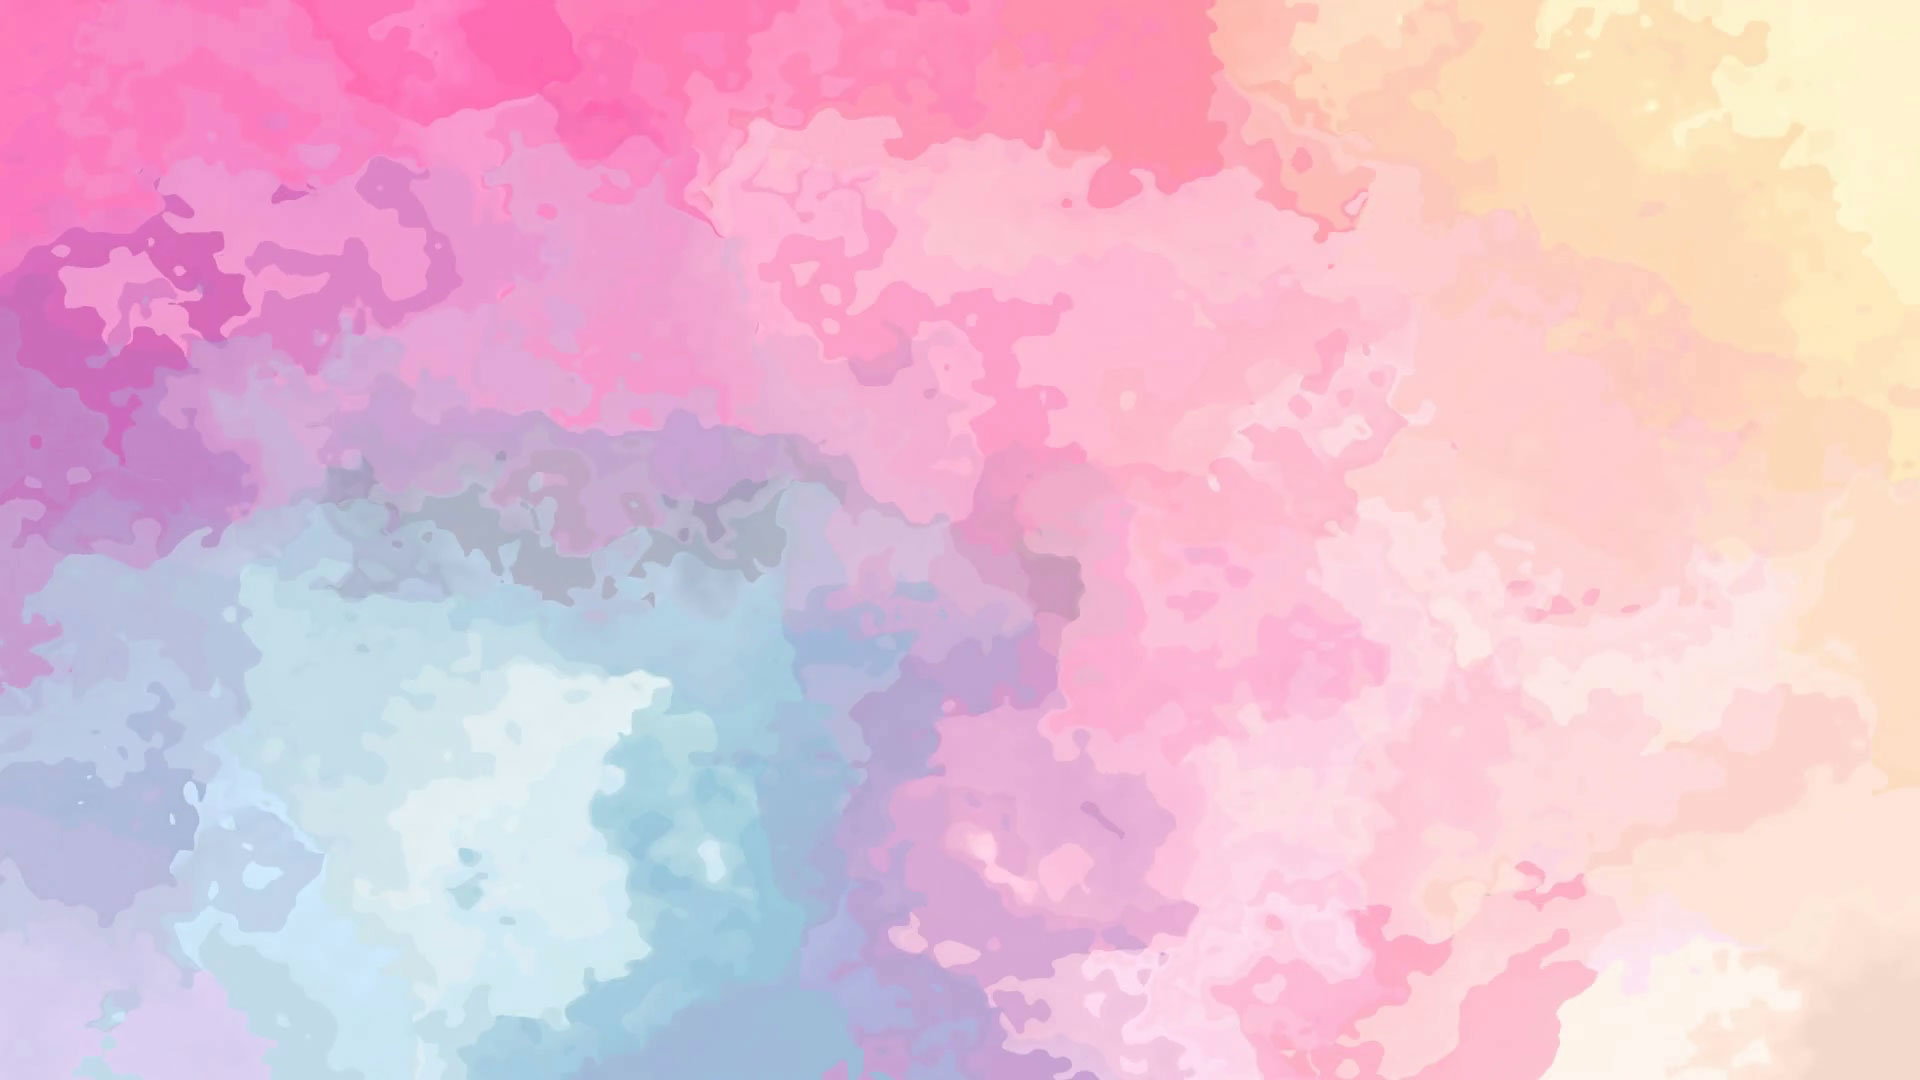 1920x1080 Pastel background textures and images to download and design with